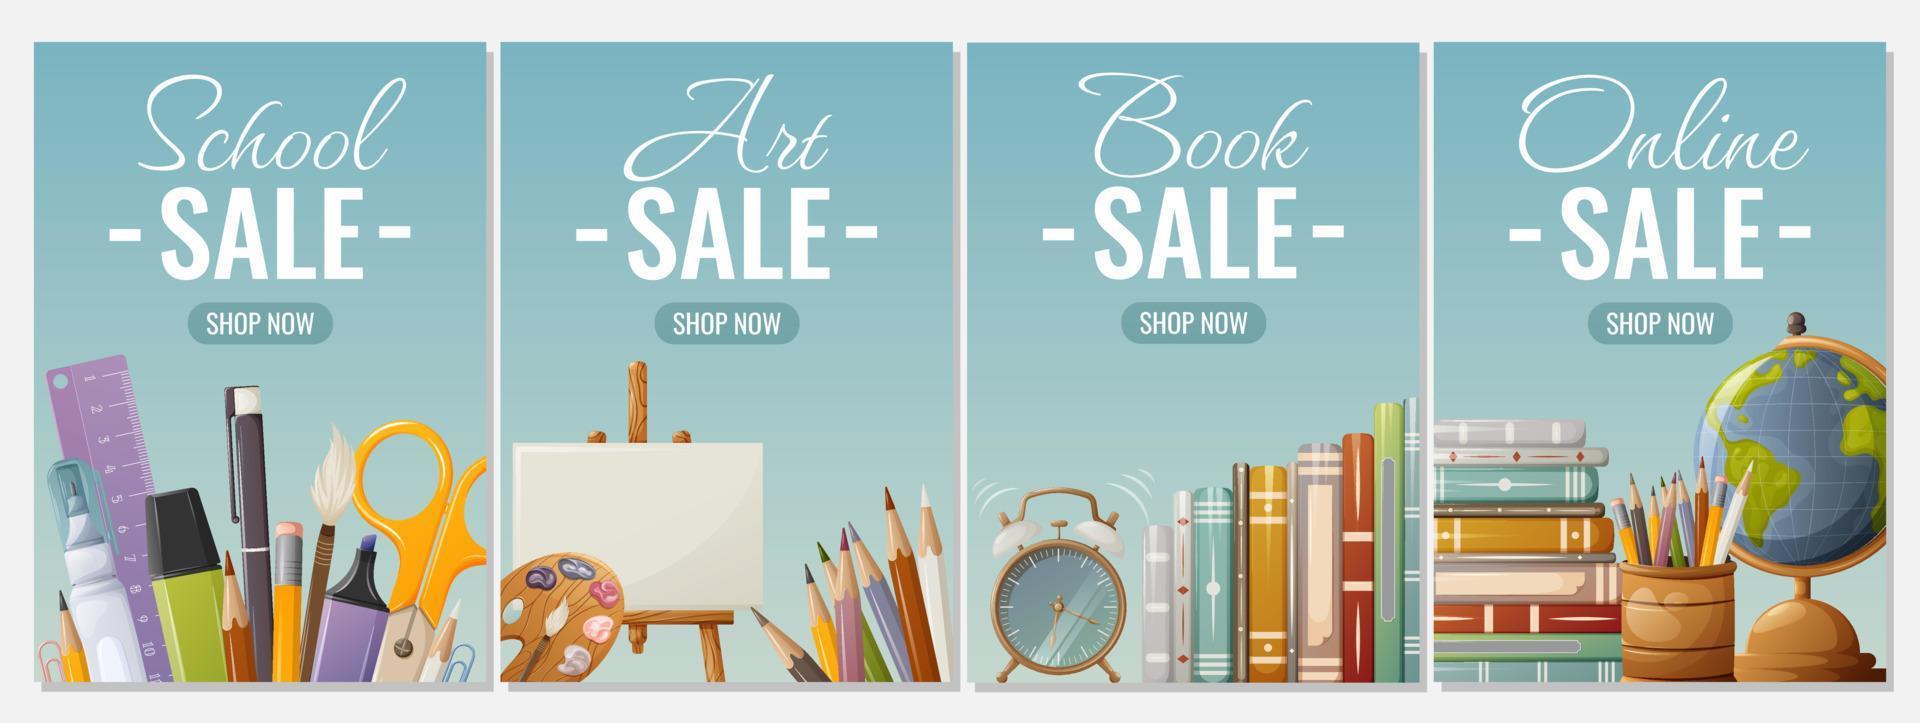 Set of sale posters. Items for school, art, reading, online store. Vector illustration. Education, business concept. For banner, flyer